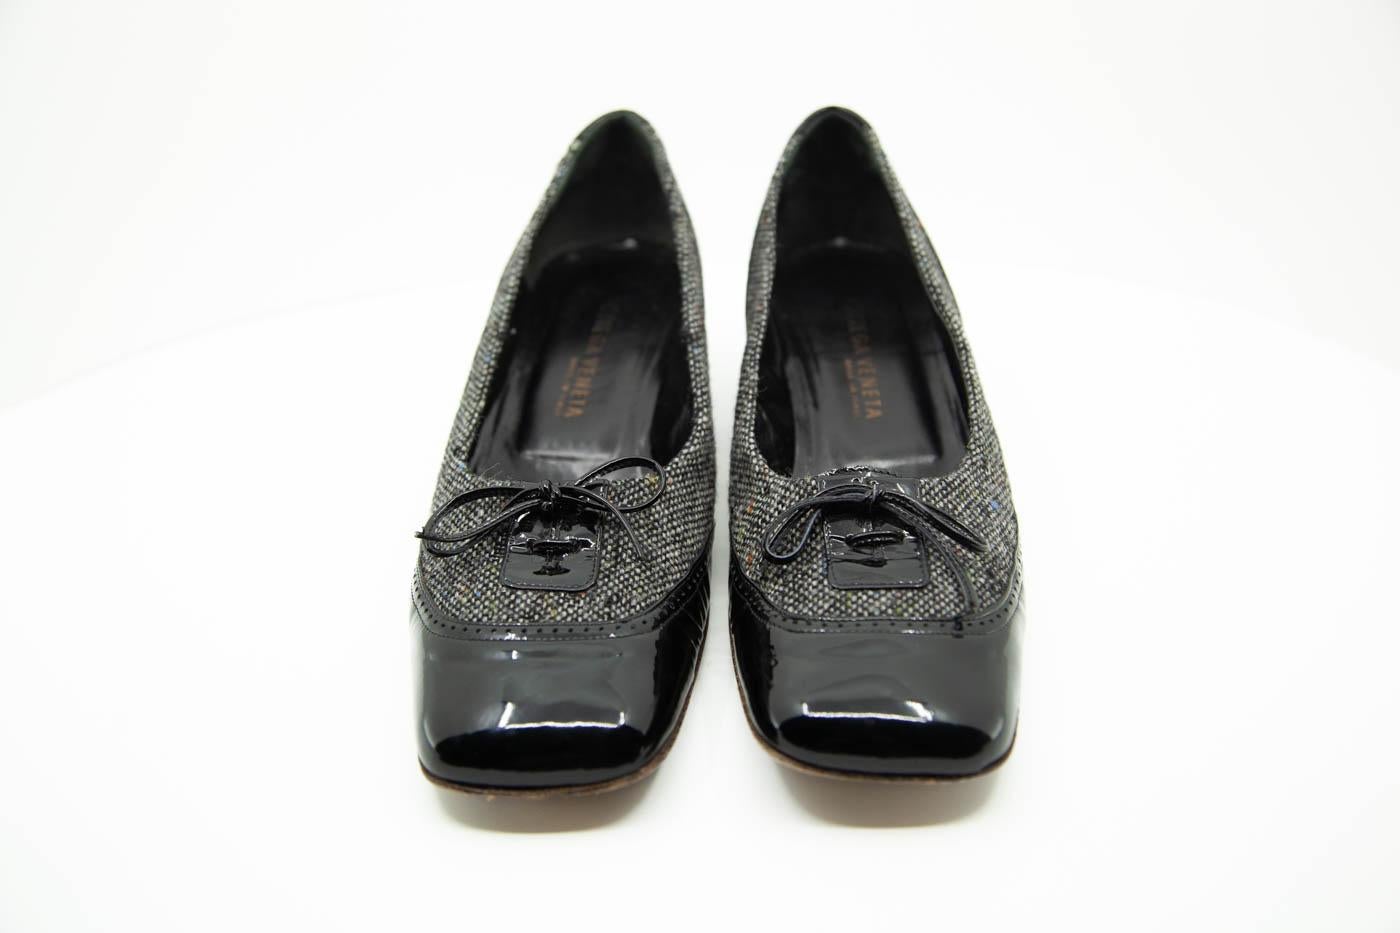 Bottega Veneta Very Vintage flats. Tweed and lace front. Original box and dust bags.
size 10 B 